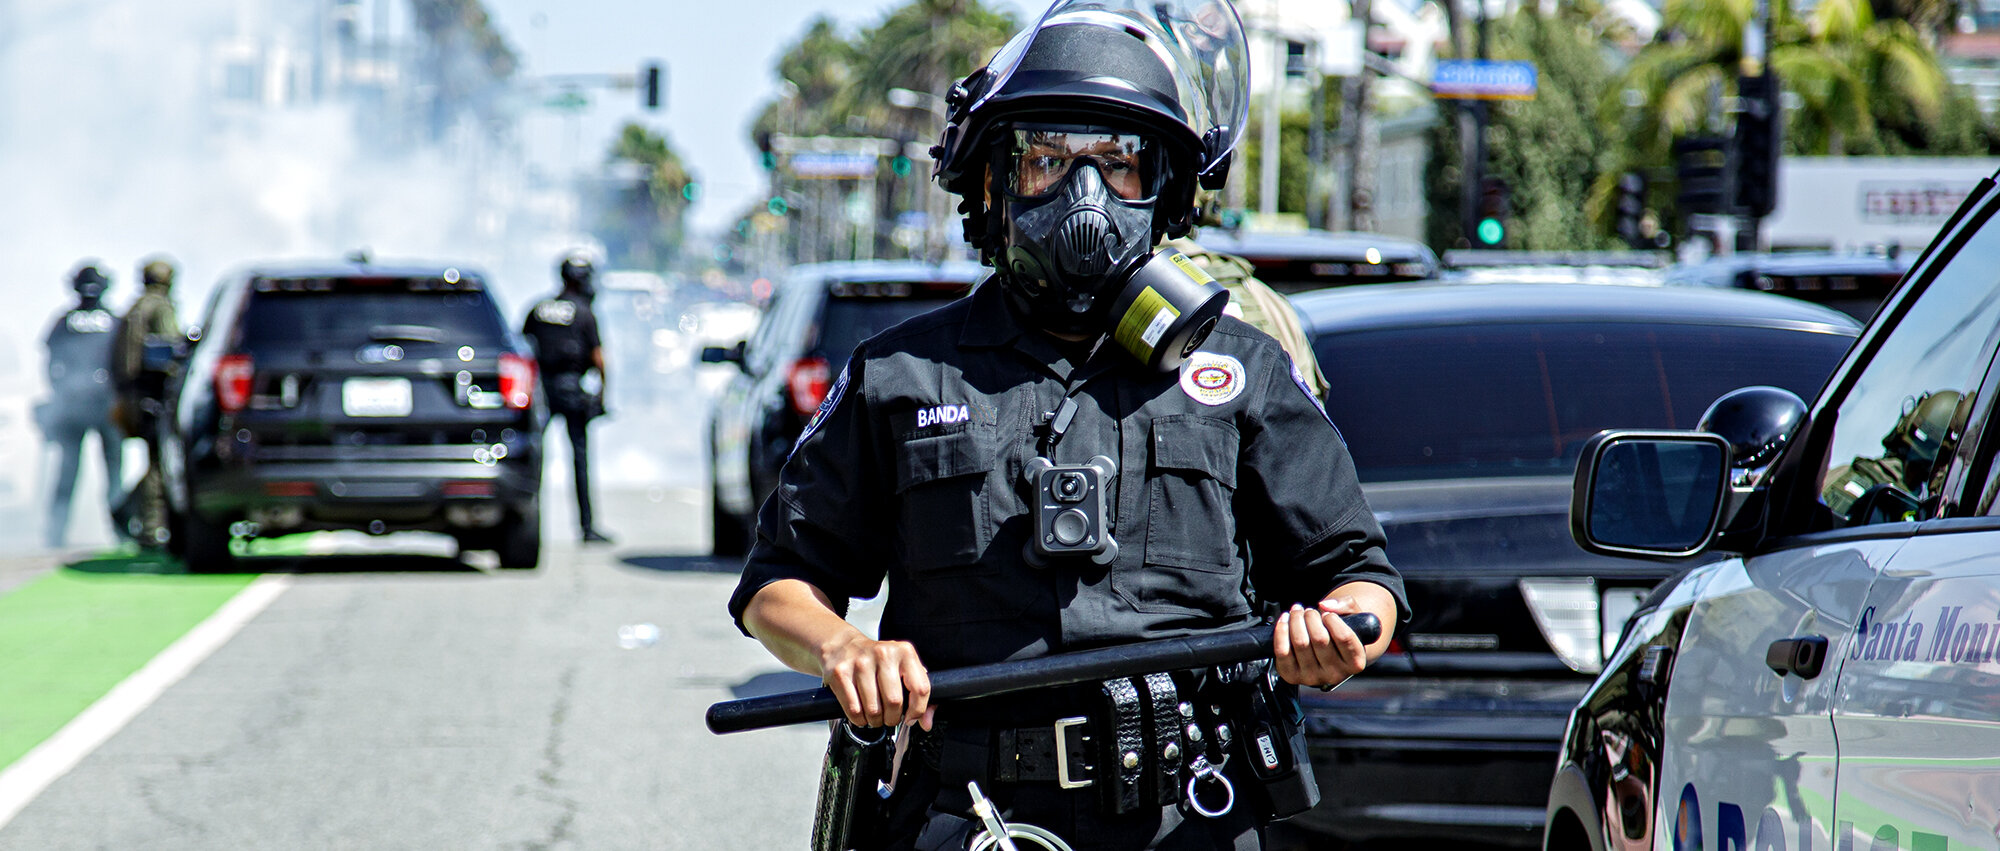  A Culver City police officer holds the line as other police officers use tear gas to disperse protesters on Ocean Avenue, Santa Monica, Calif., on Sunday, May 31, 2020. Other Los Angeles area police forces, including Culver City and Beverly Hills, s